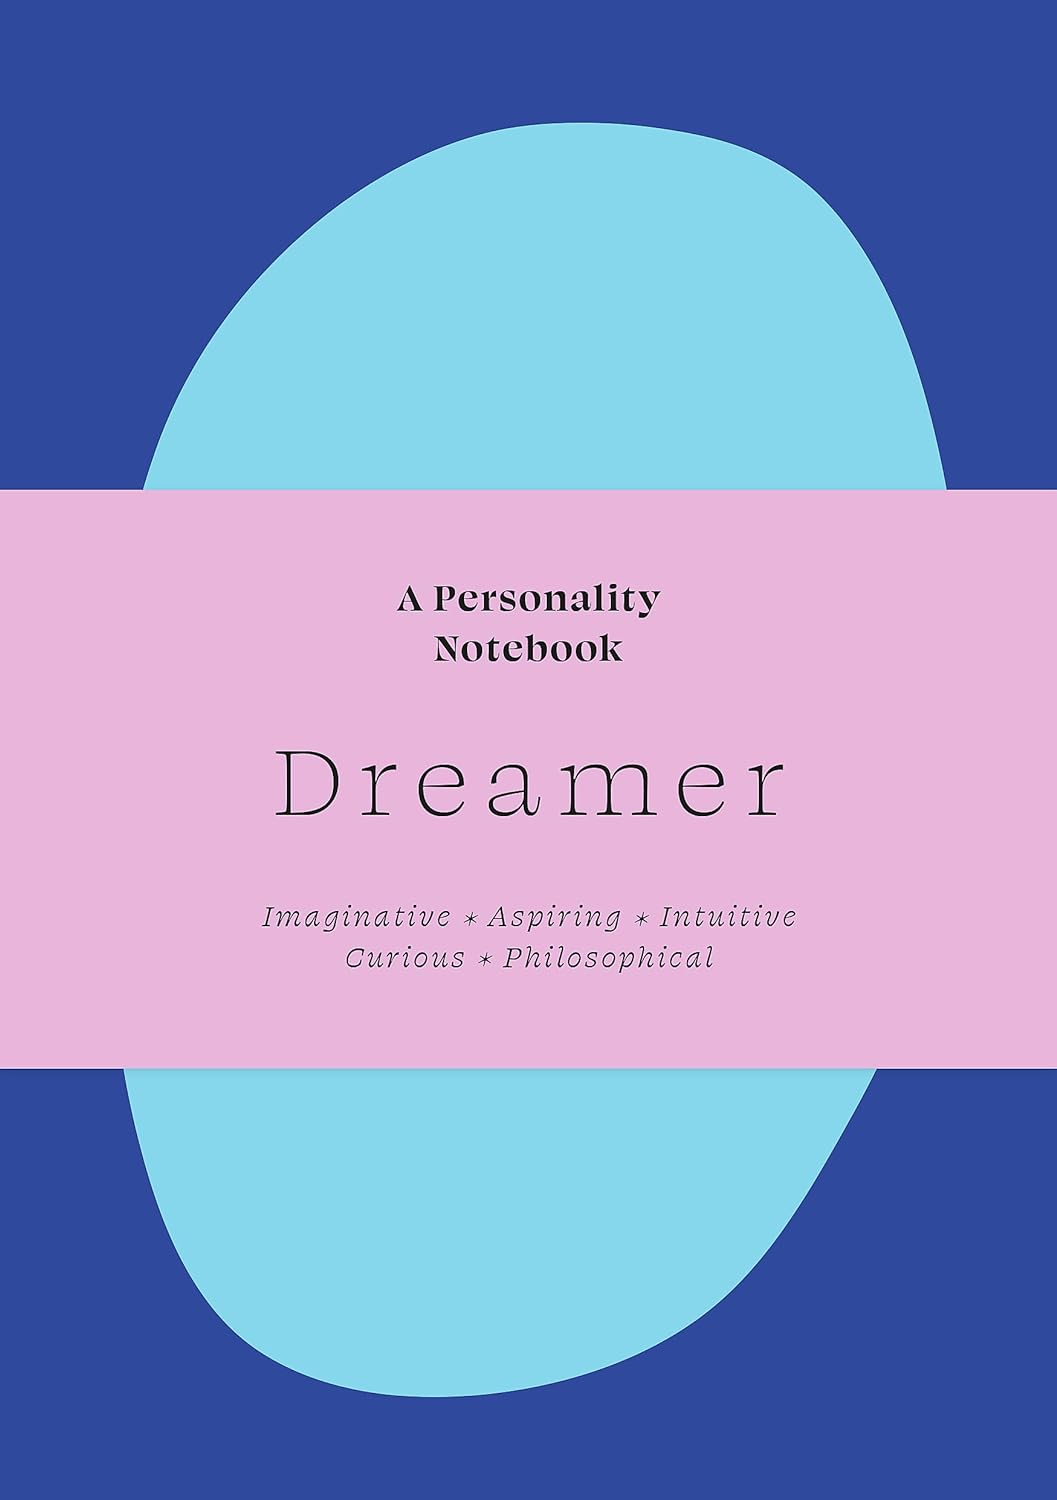 Dreamer - Personality notebooks